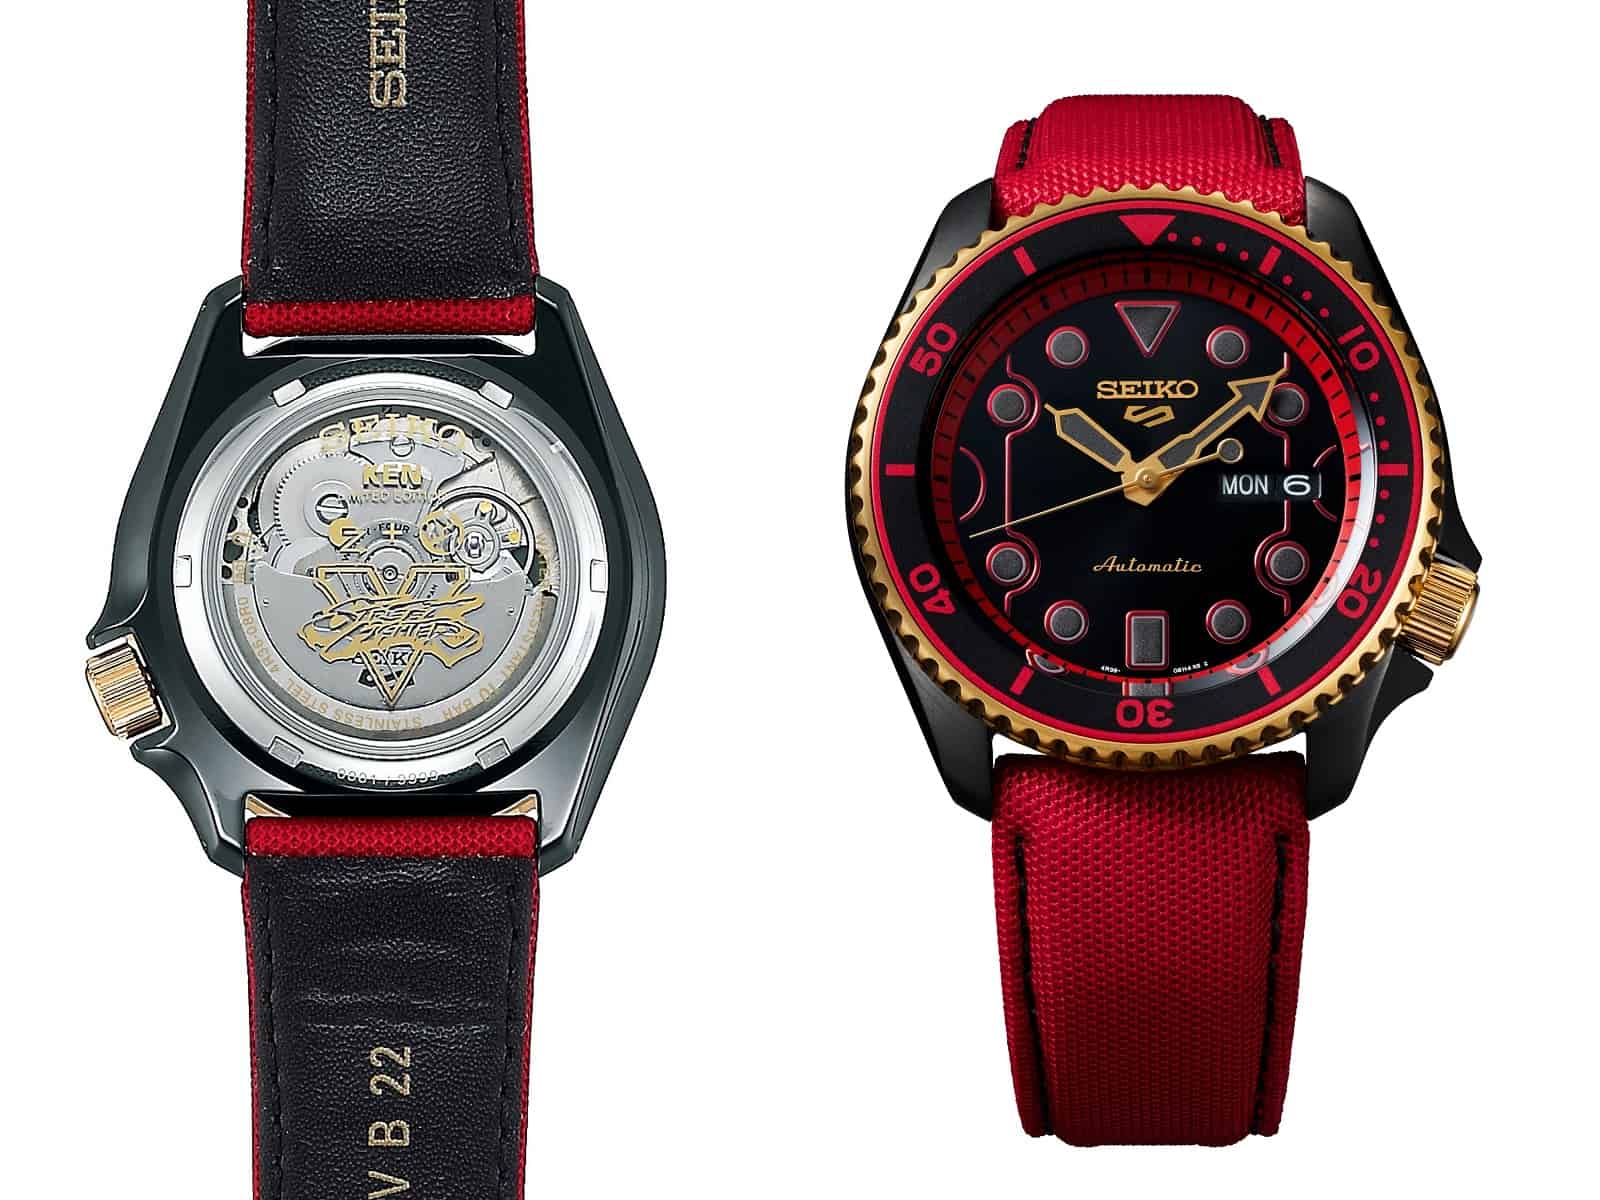 Seiko 5 Sports Street Fighter V Limited Edition